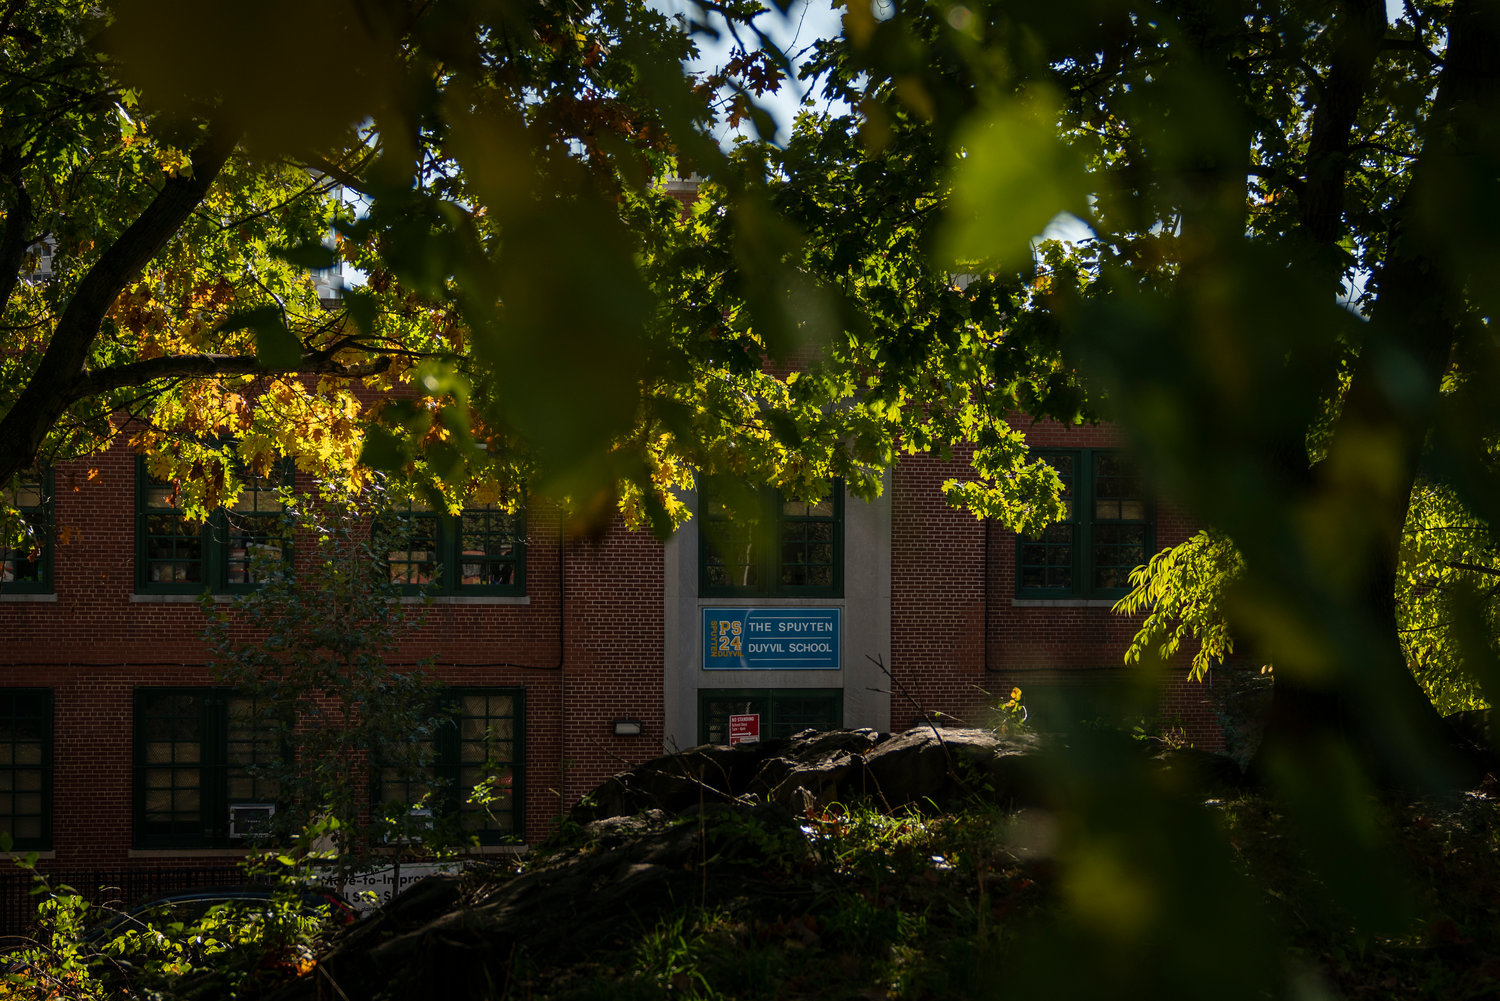 While a few other public schools in the area had some positive coronavirus tests here and there, P.S. 24 Spuyten Duyvil was the first to need to close for two weeks after a pair of students were infected. The school reopened Nov. 5.